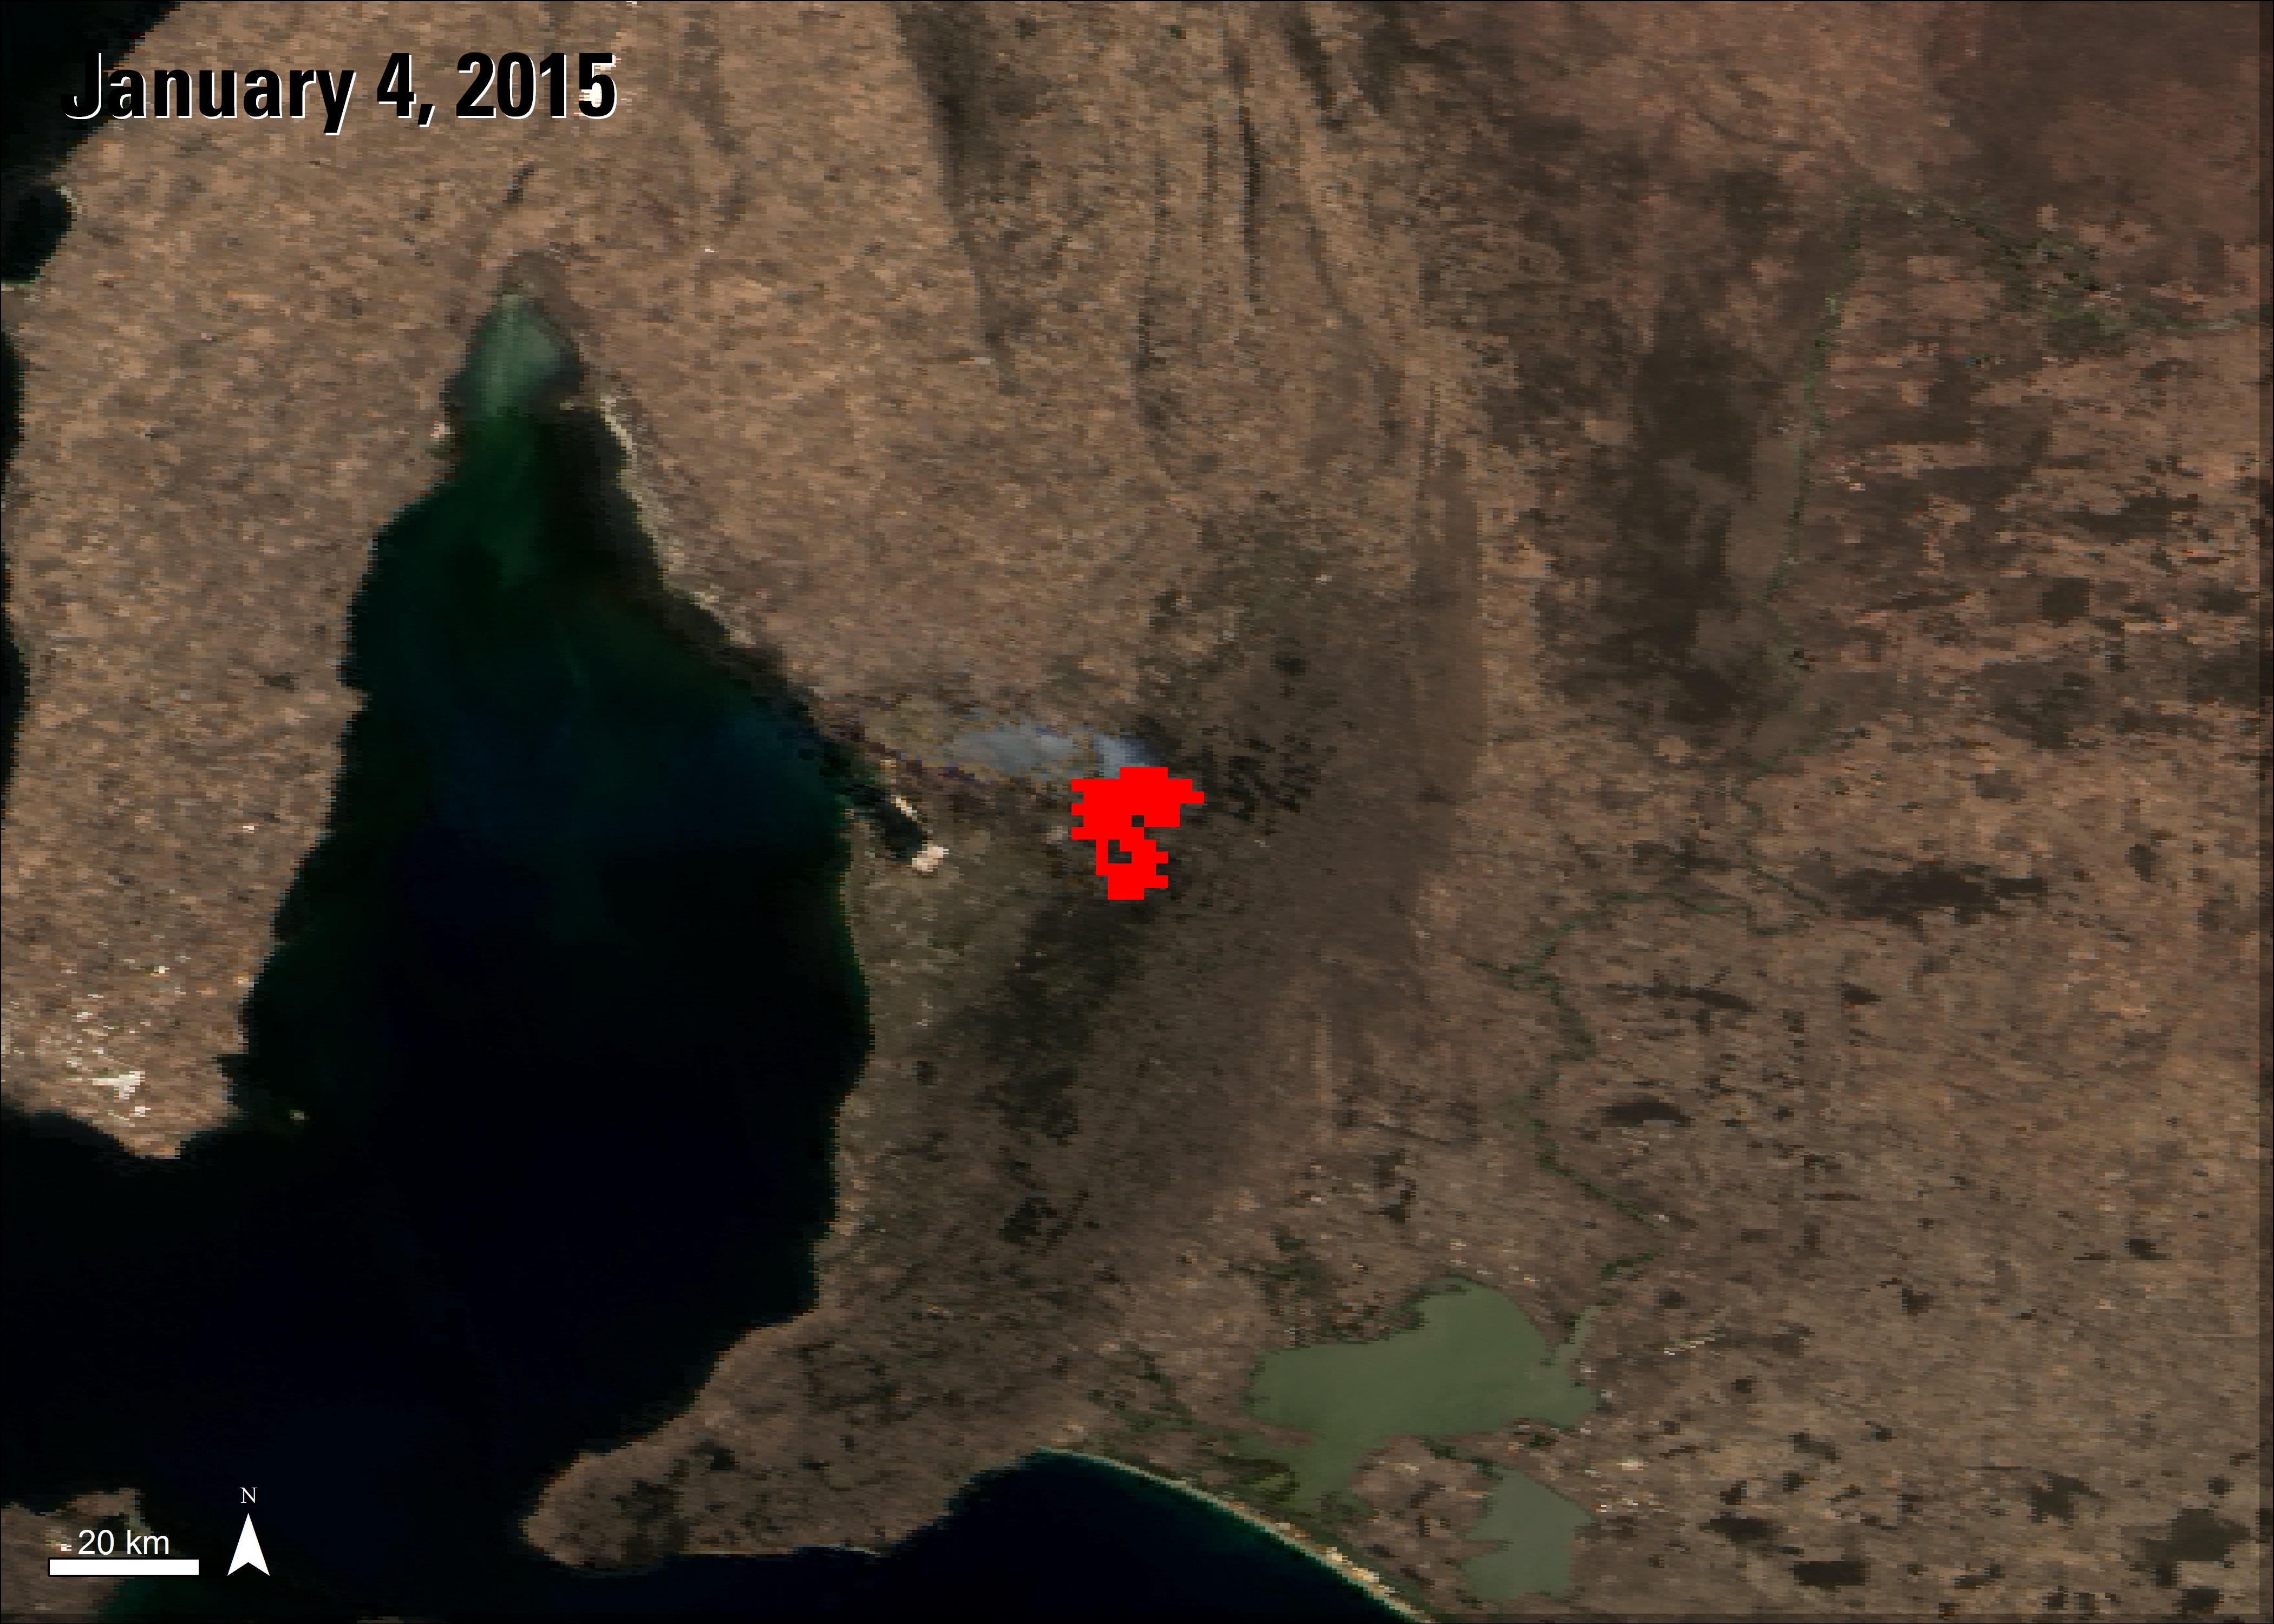 MODIS fire data over surface reflectance data showing the Sampson Flat brushfires in South Australia.